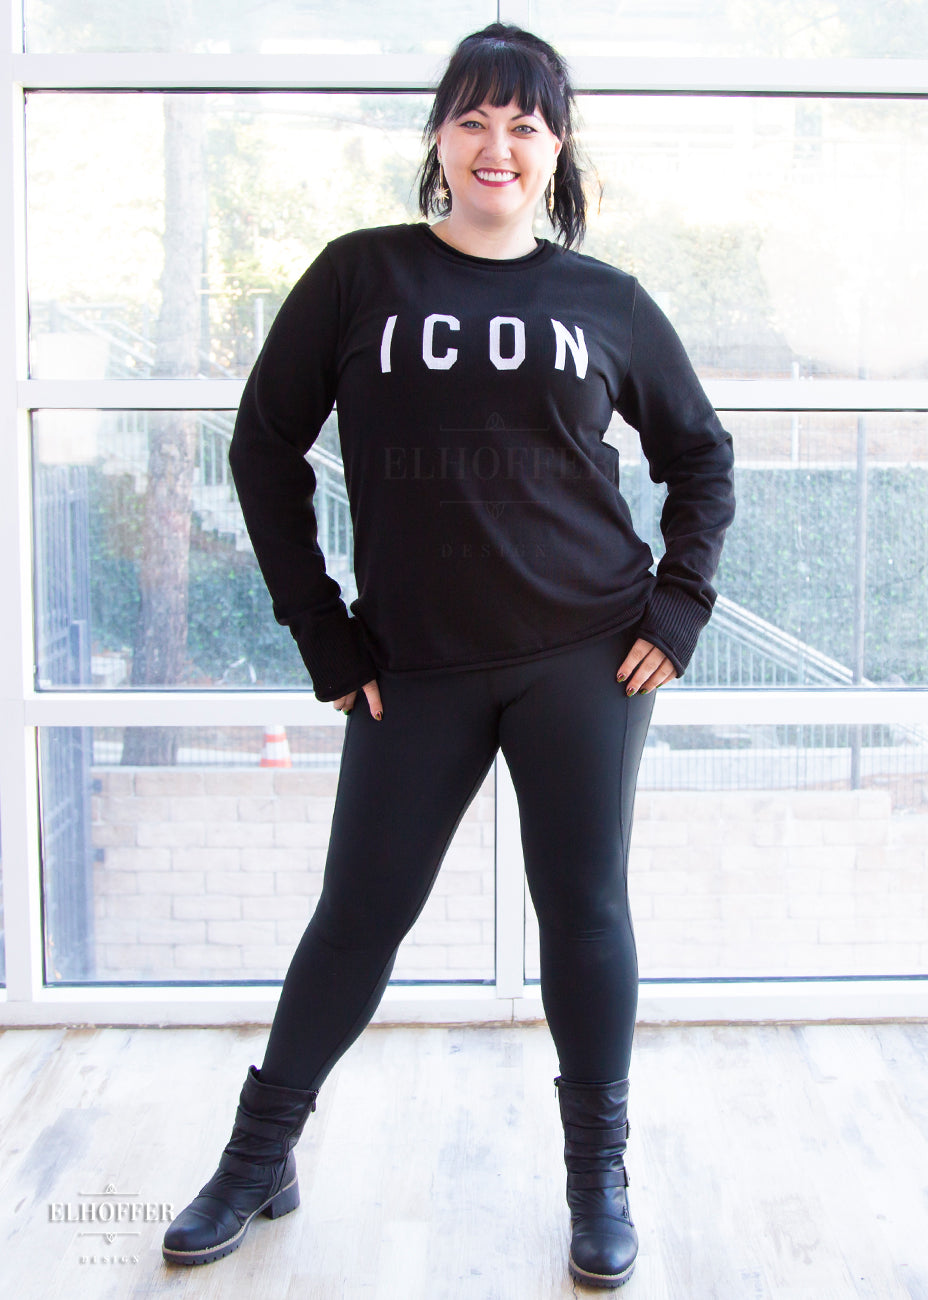 Bernadette, a fair skinned L model with long dark brown hair pulled up in a pony tail and bangs, is smiling while wearing an XL sample of black unisex sweater with white bold embroidered letters that spell ICON and has long sleeves with thumbholes. The sweater also has a rolled hem on both the neckline and around the cuffs. The XL sample makes the sweater look like a relaxed fit, she would get her normal L size if she wanted it more fitted.